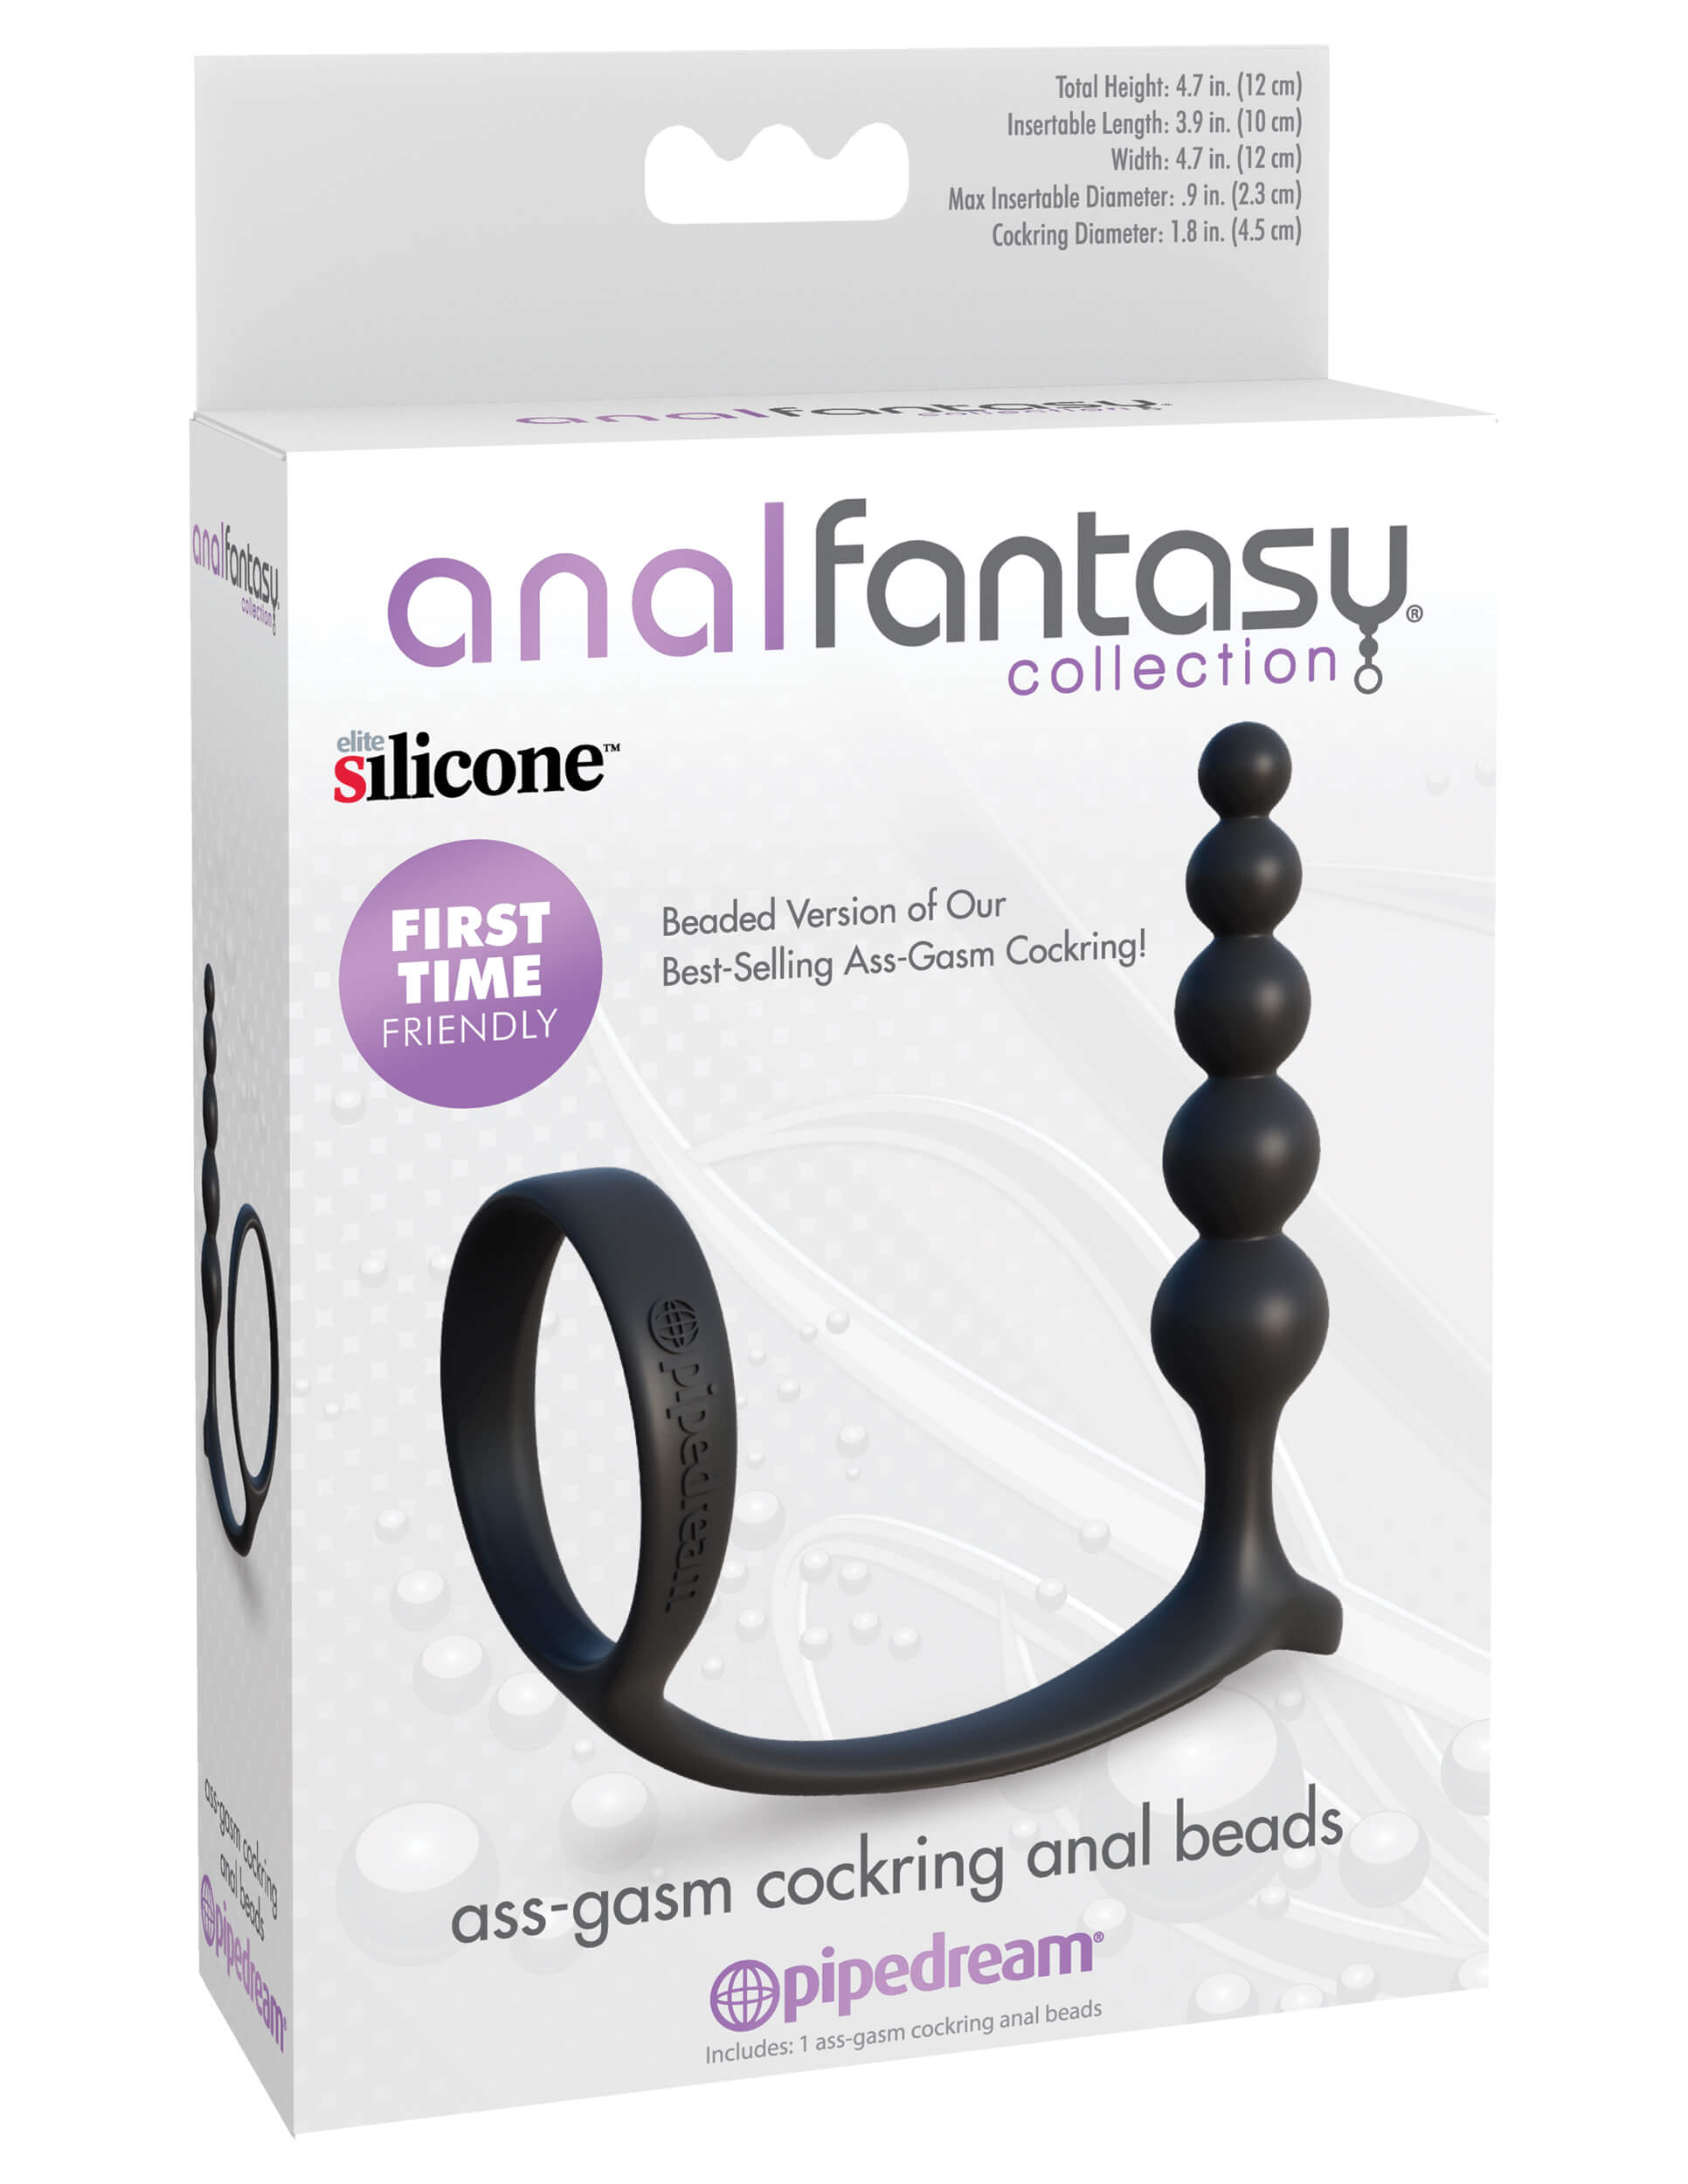 Anal Fantasy Ass-gasm Cockring Anal Beads